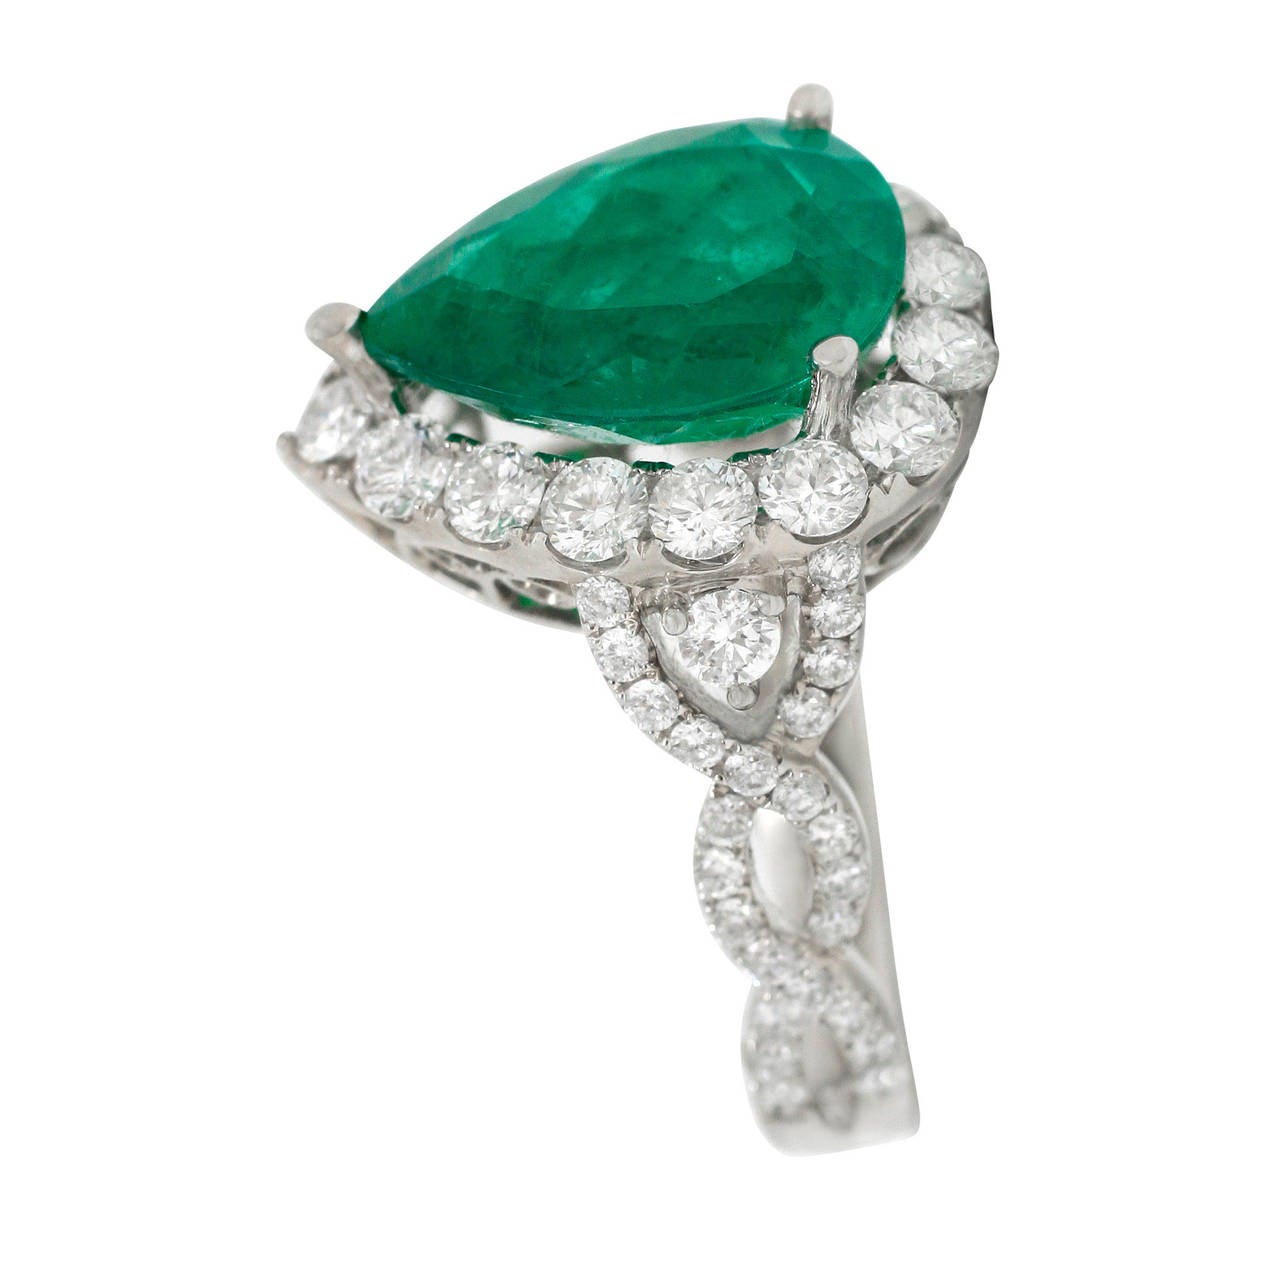 Ring is made of 18kt white gold and set with 1.76ct of natural round brilliant cut diamonds VS clarity and F-G color.  The Emerald is pear shape, weighs 4.55ct and is a beautiful color vitually free from eye visible inclusions.